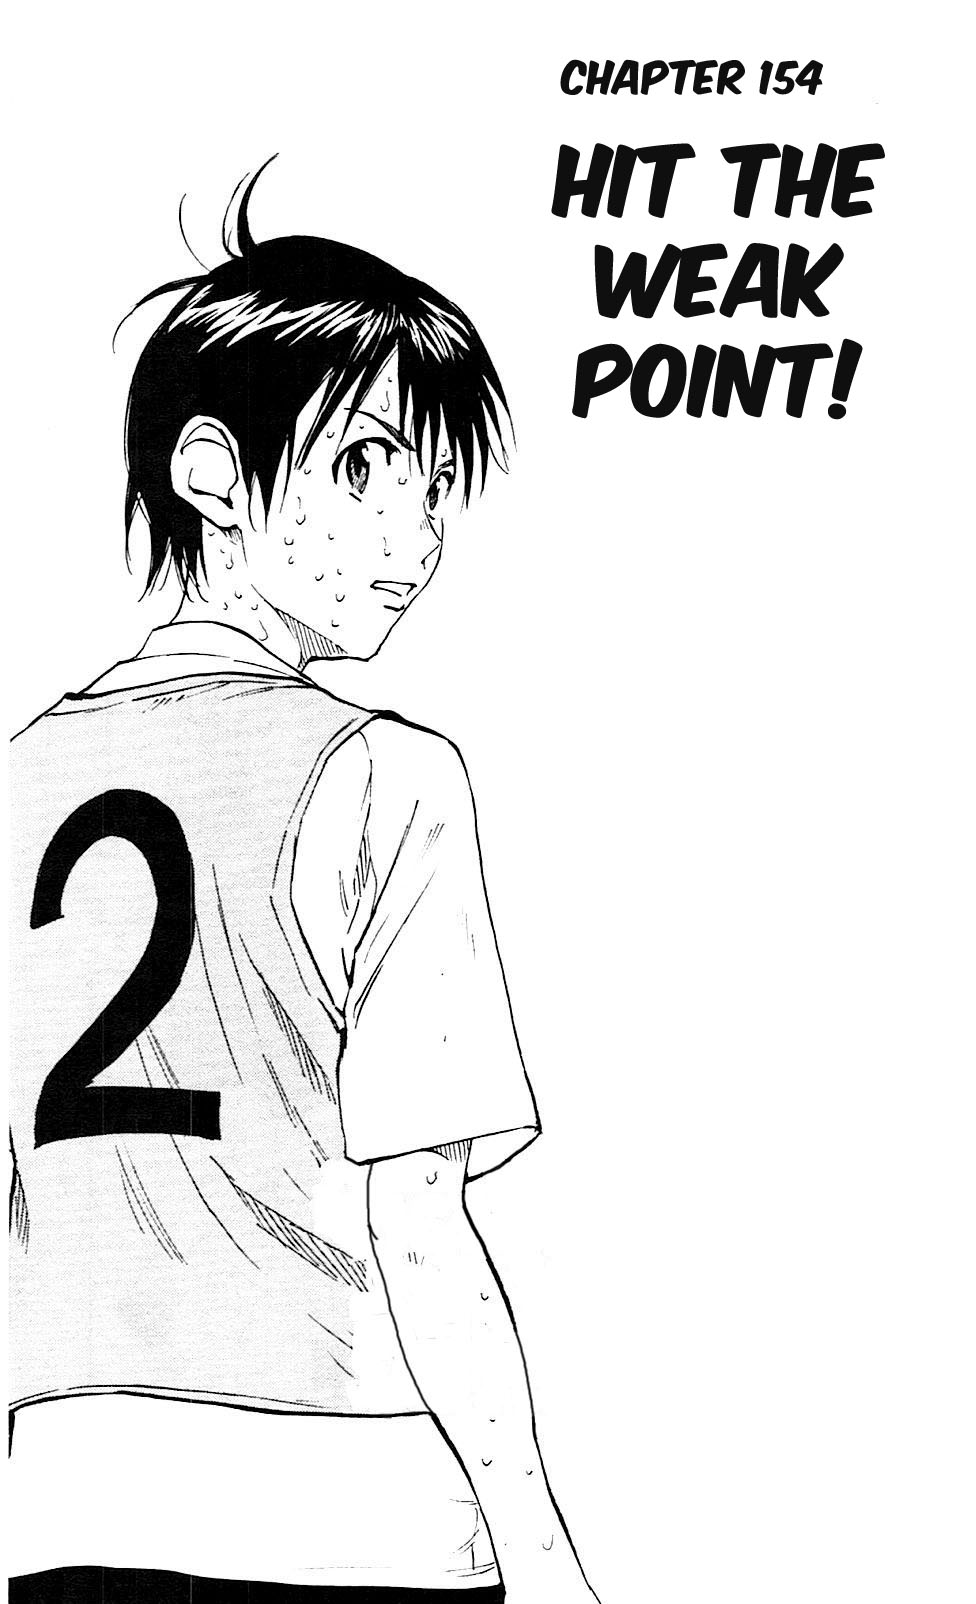 BE BLUES ~Ao ni nare~ Vol. 16 Ch. 154 Hit the Weak Point!